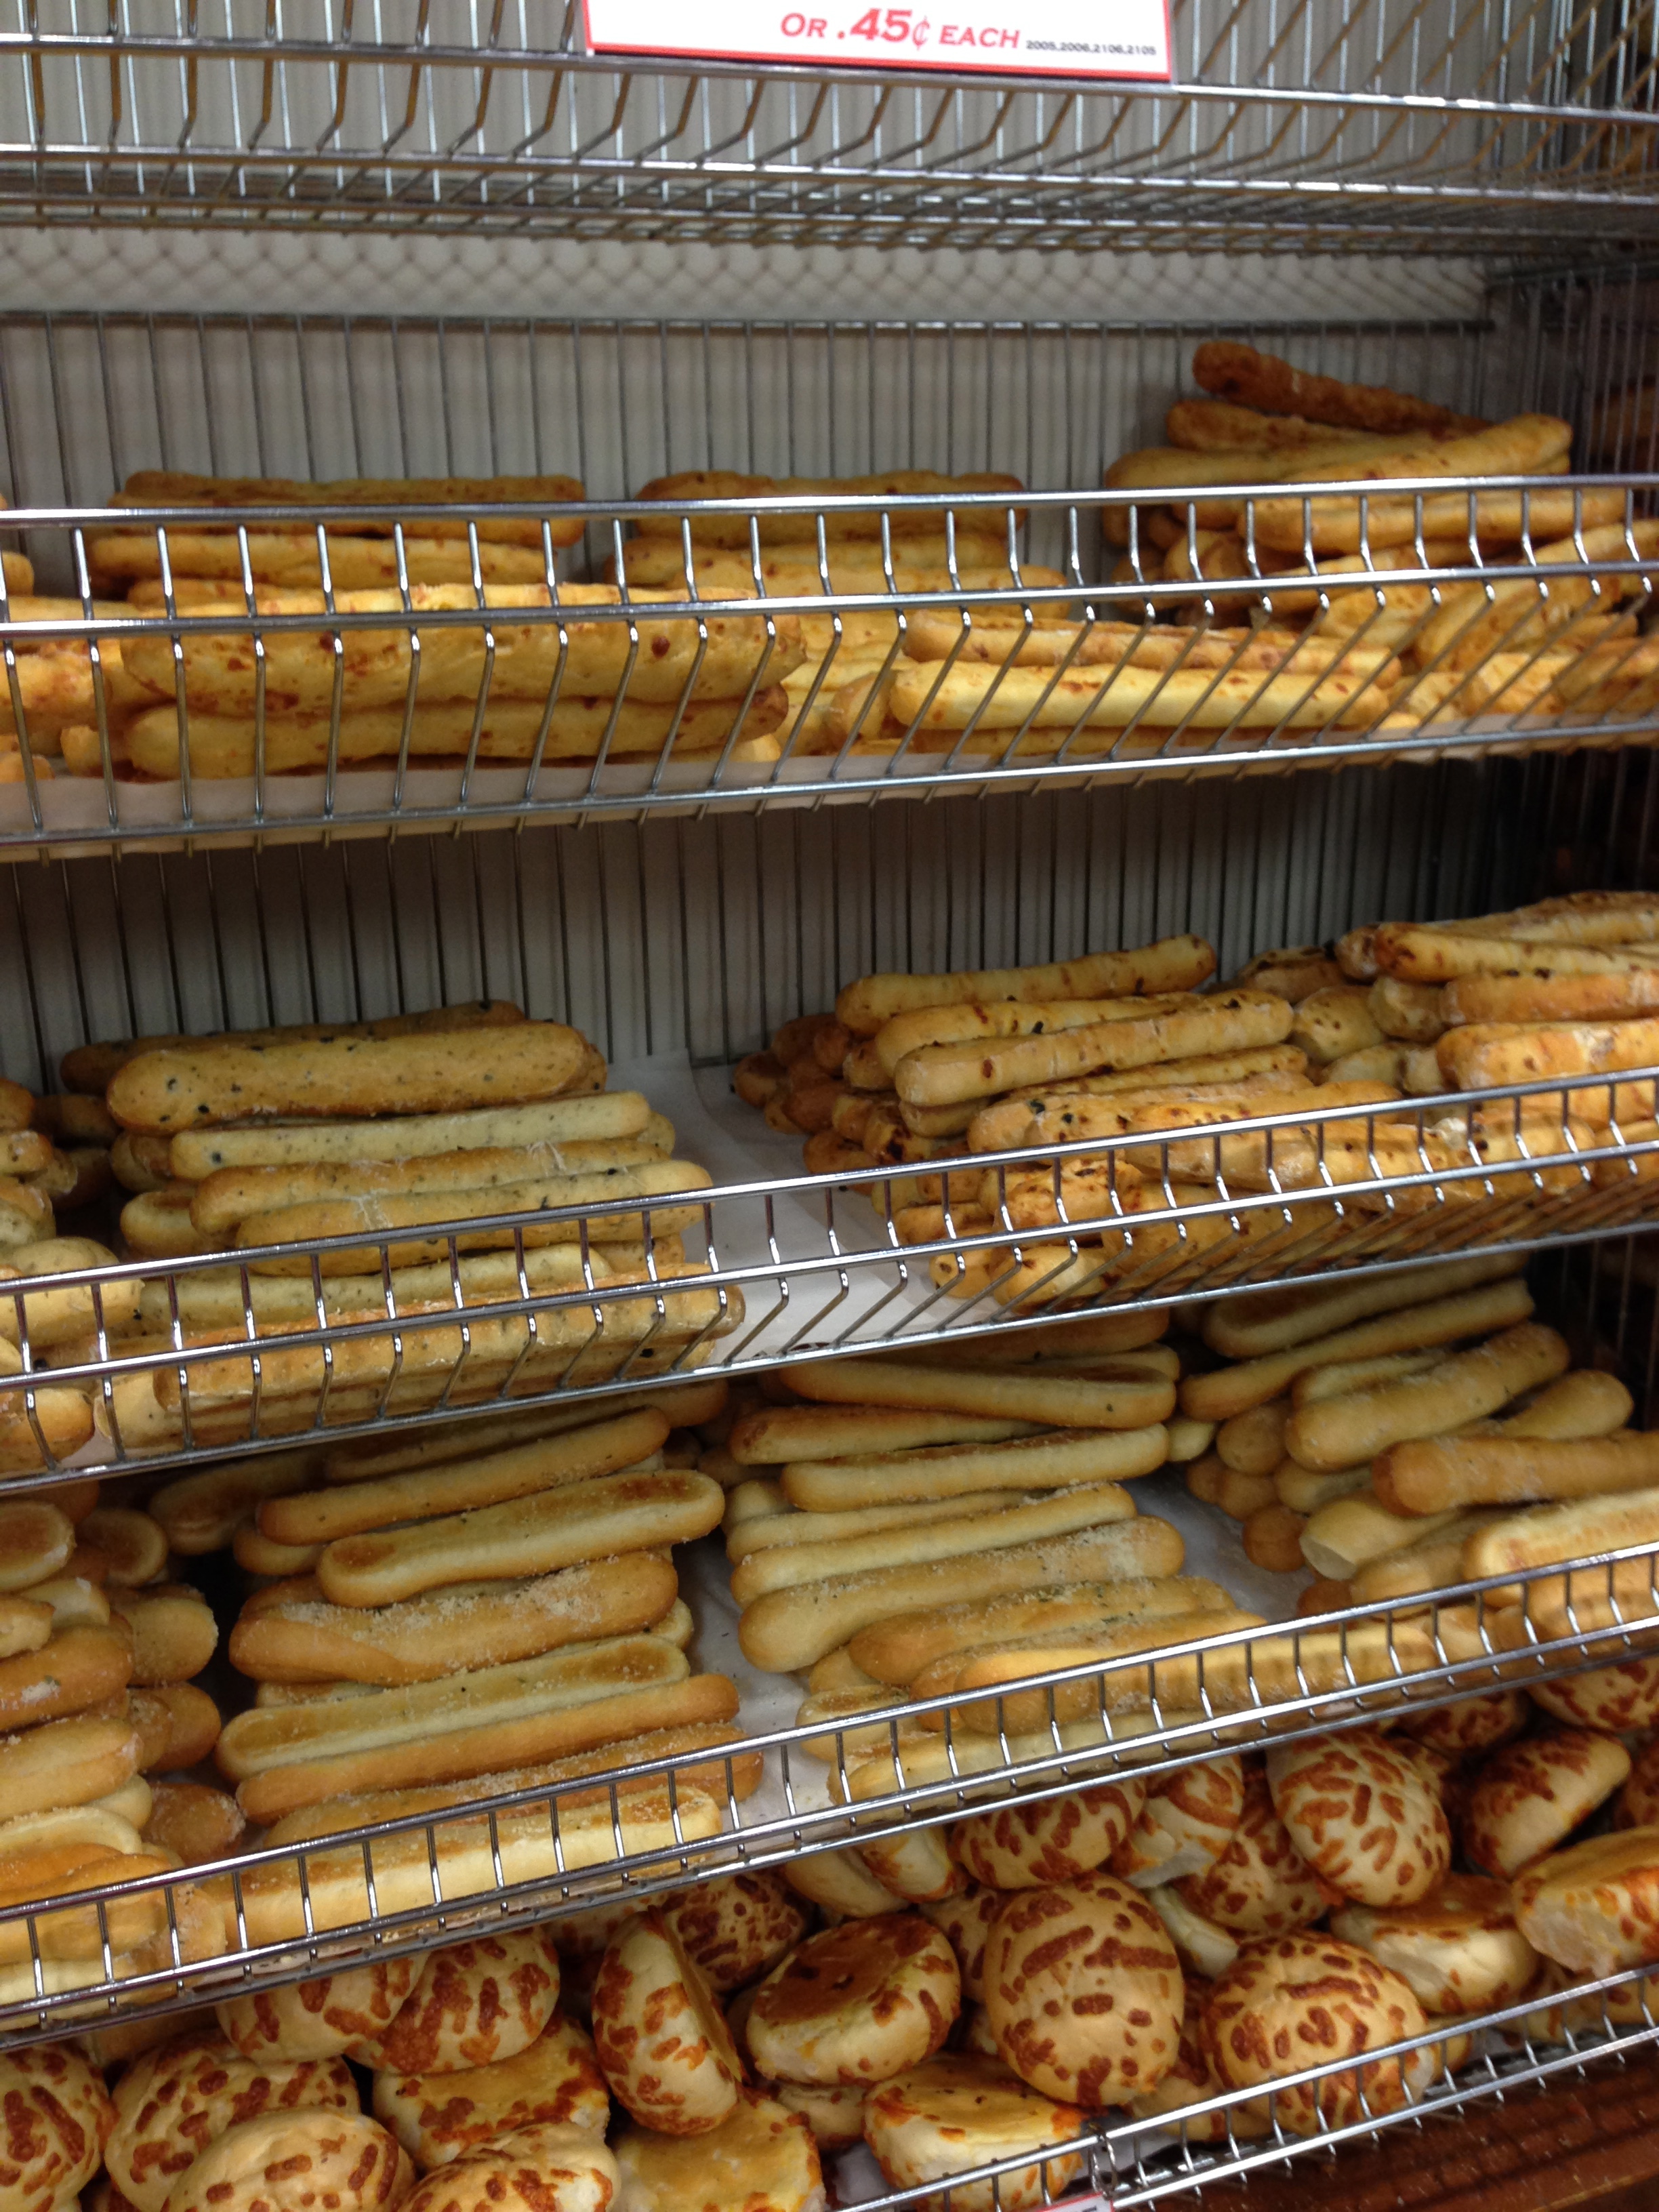 So many different types of bread sticks - garlic, cheese, sundried tomato and olive.